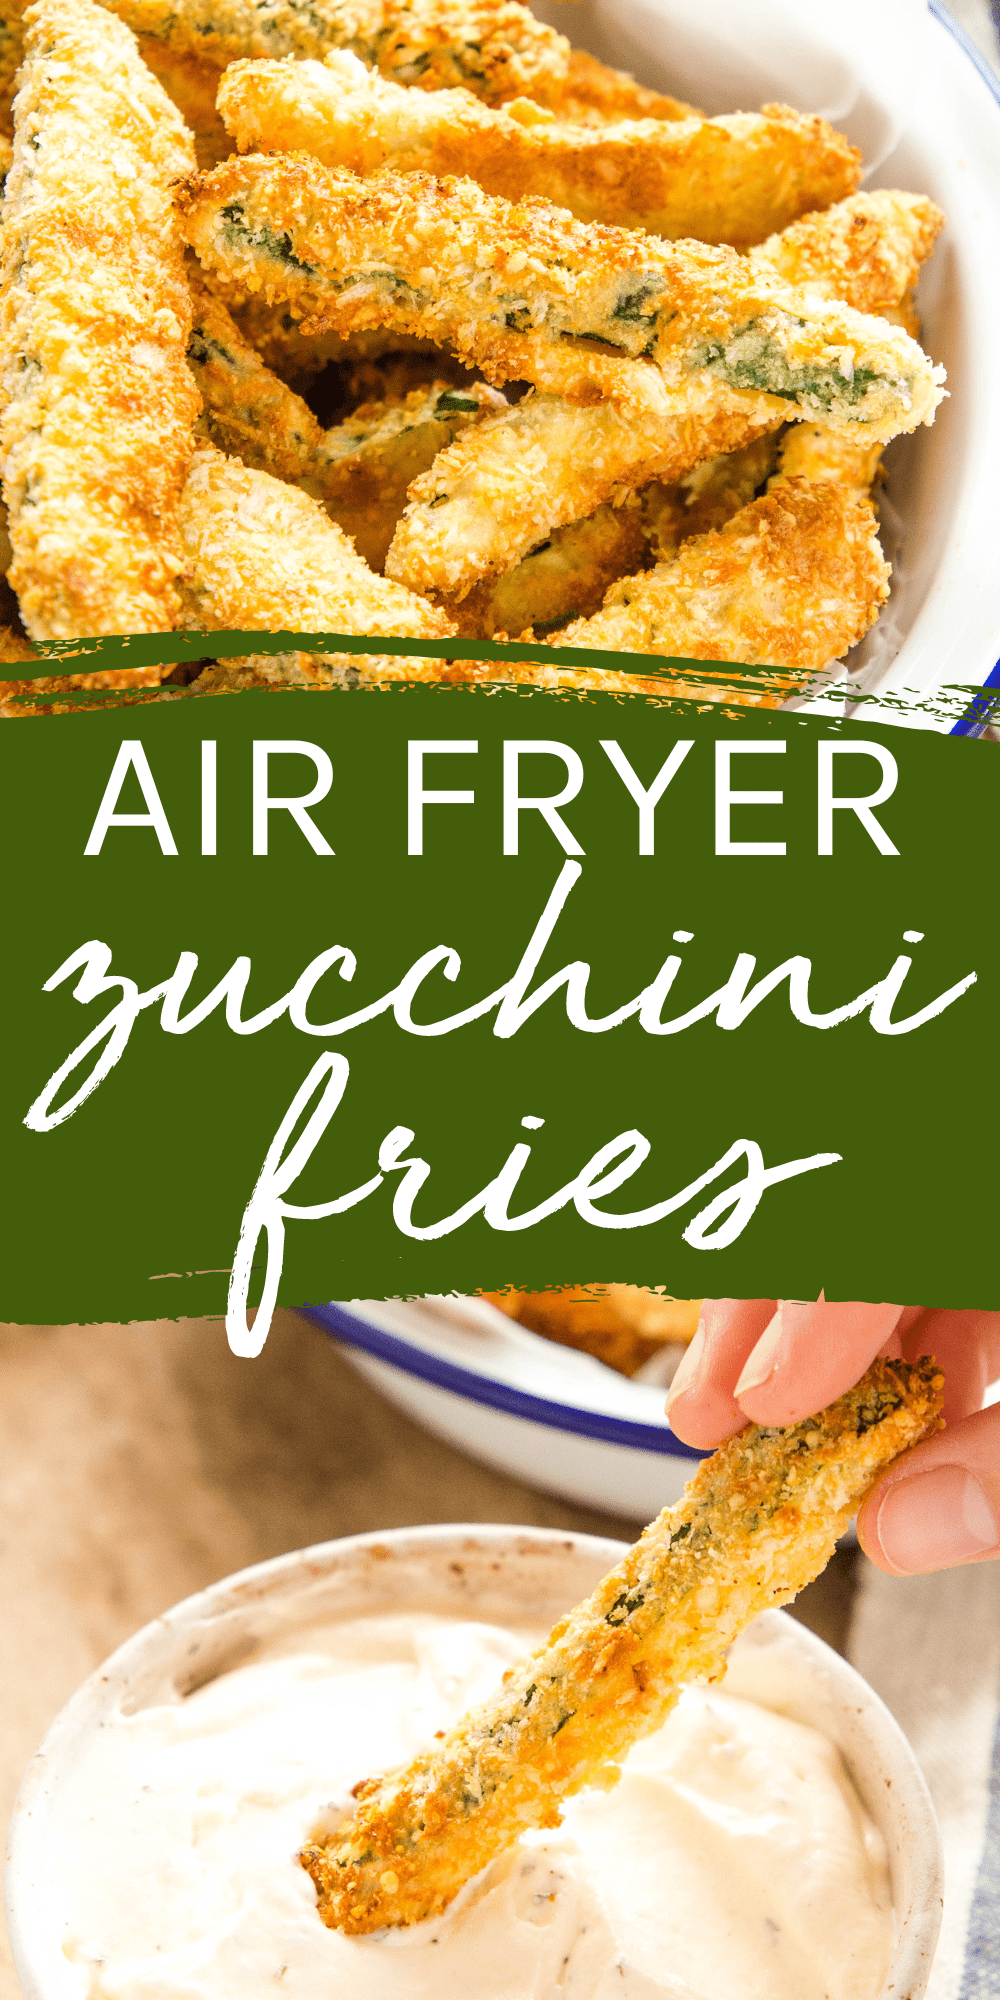 These Air Fryer Zucchini Fries are crispy, savoury, and make the perfect simple side dish or snack! Made with a simple and delicious panko Parmesan crust! Ready in 15 minutes or less! Recipe from thebusybaker.ca! #zucchinifries #airfryerzucchinifries #airfryerzucchini #airfryerrecipe #airfryerfries #zucchini #fries #snack via @busybakerblog